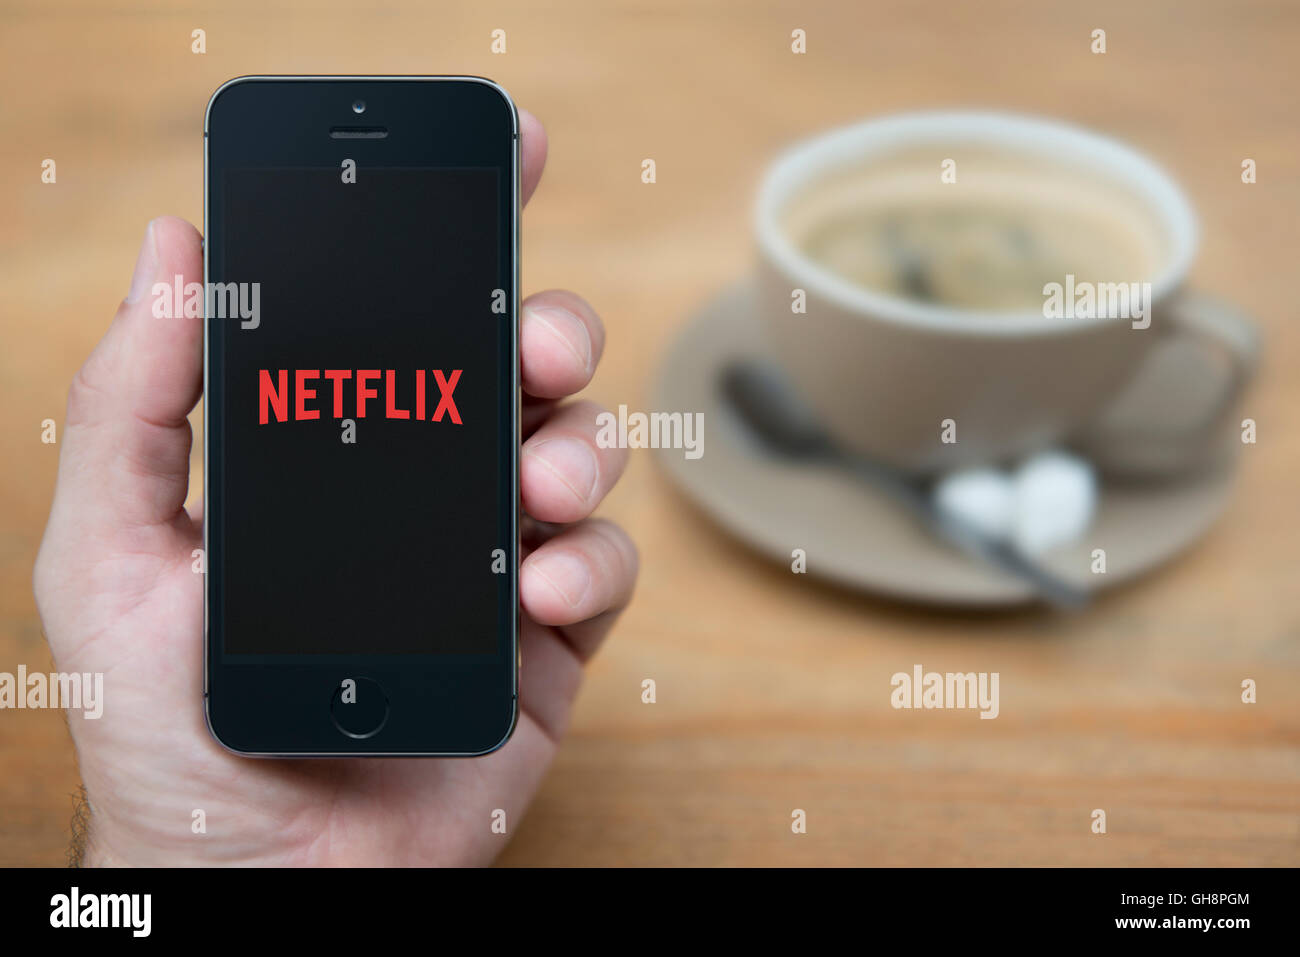 A man looks at his iPhone which displays the Netflix logo, while sat with a cup of coffee (Editorial use only). Stock Photo